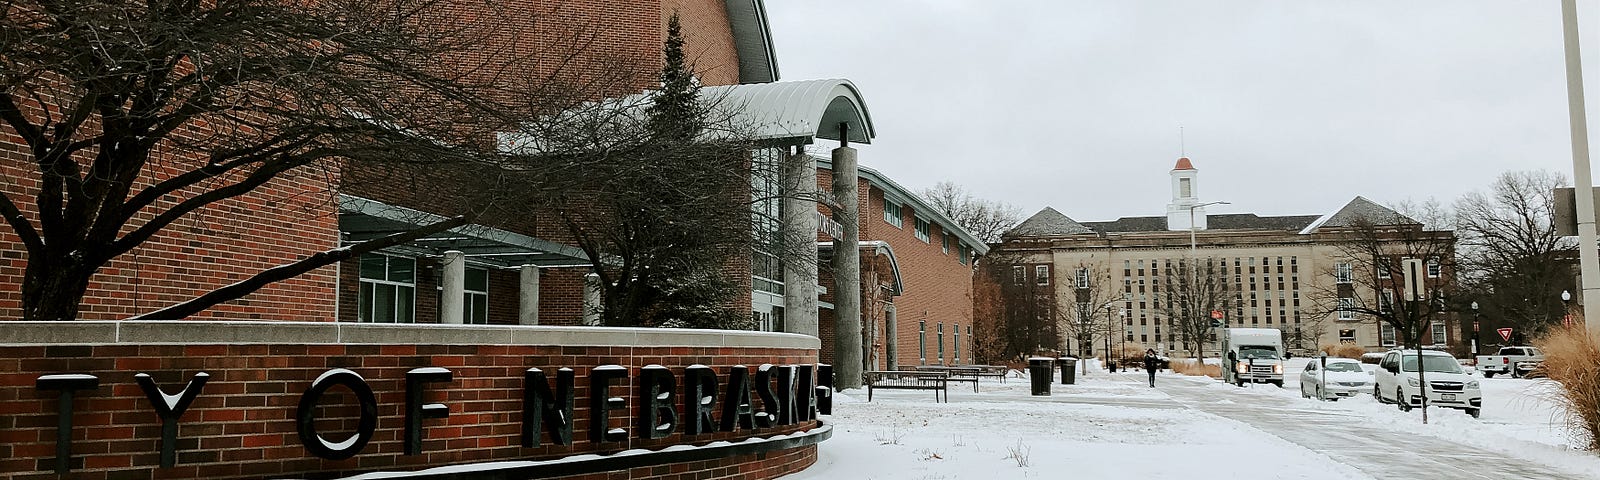 Snow covers the ground surrounding the Visitors Center with Love Library in the distance.